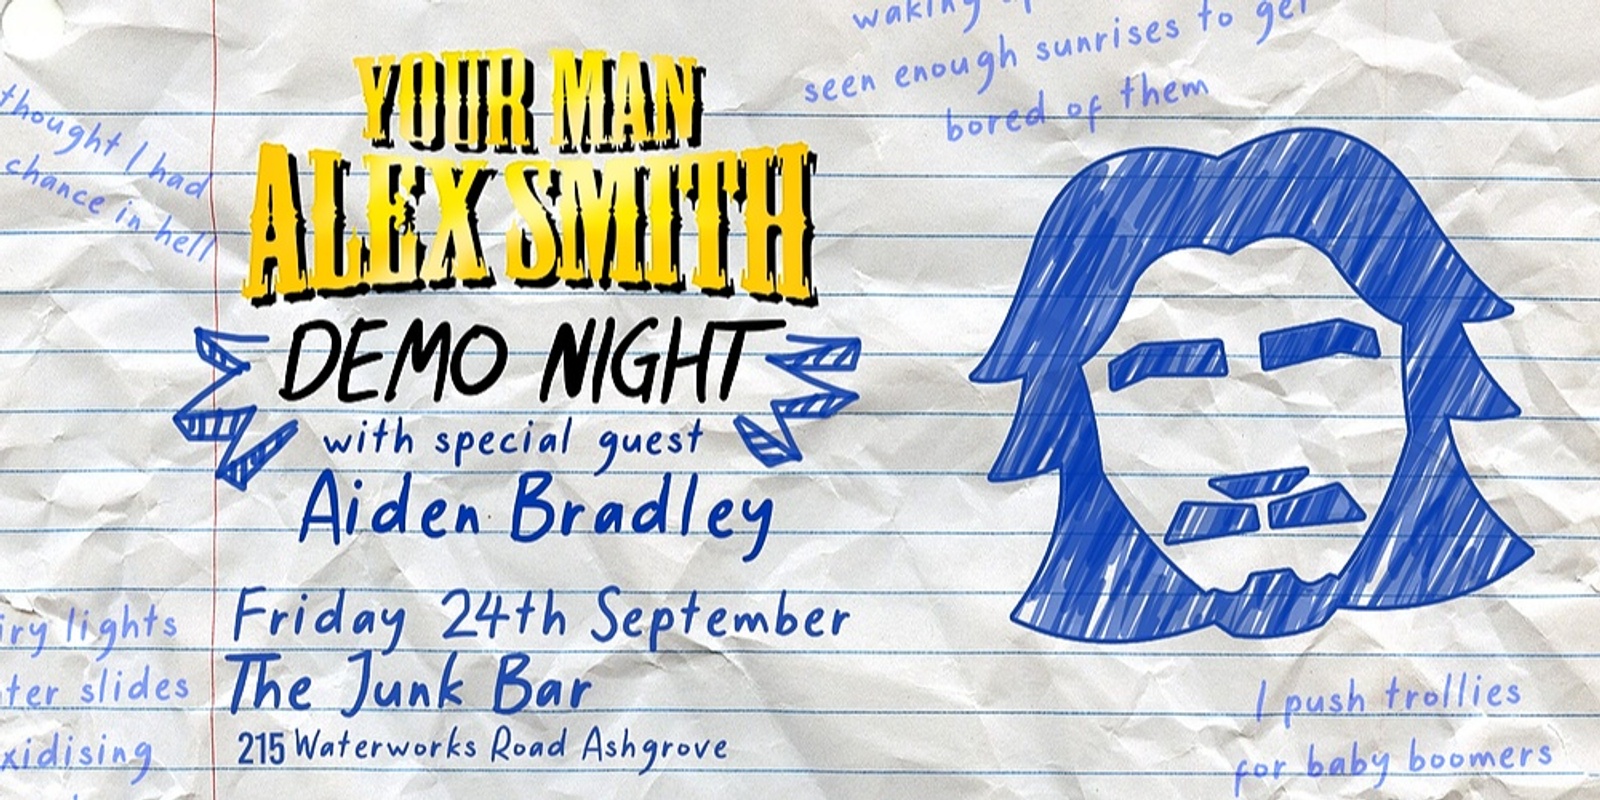 Banner image for Your Man Alex Smith Demo Night with Aiden Bradley